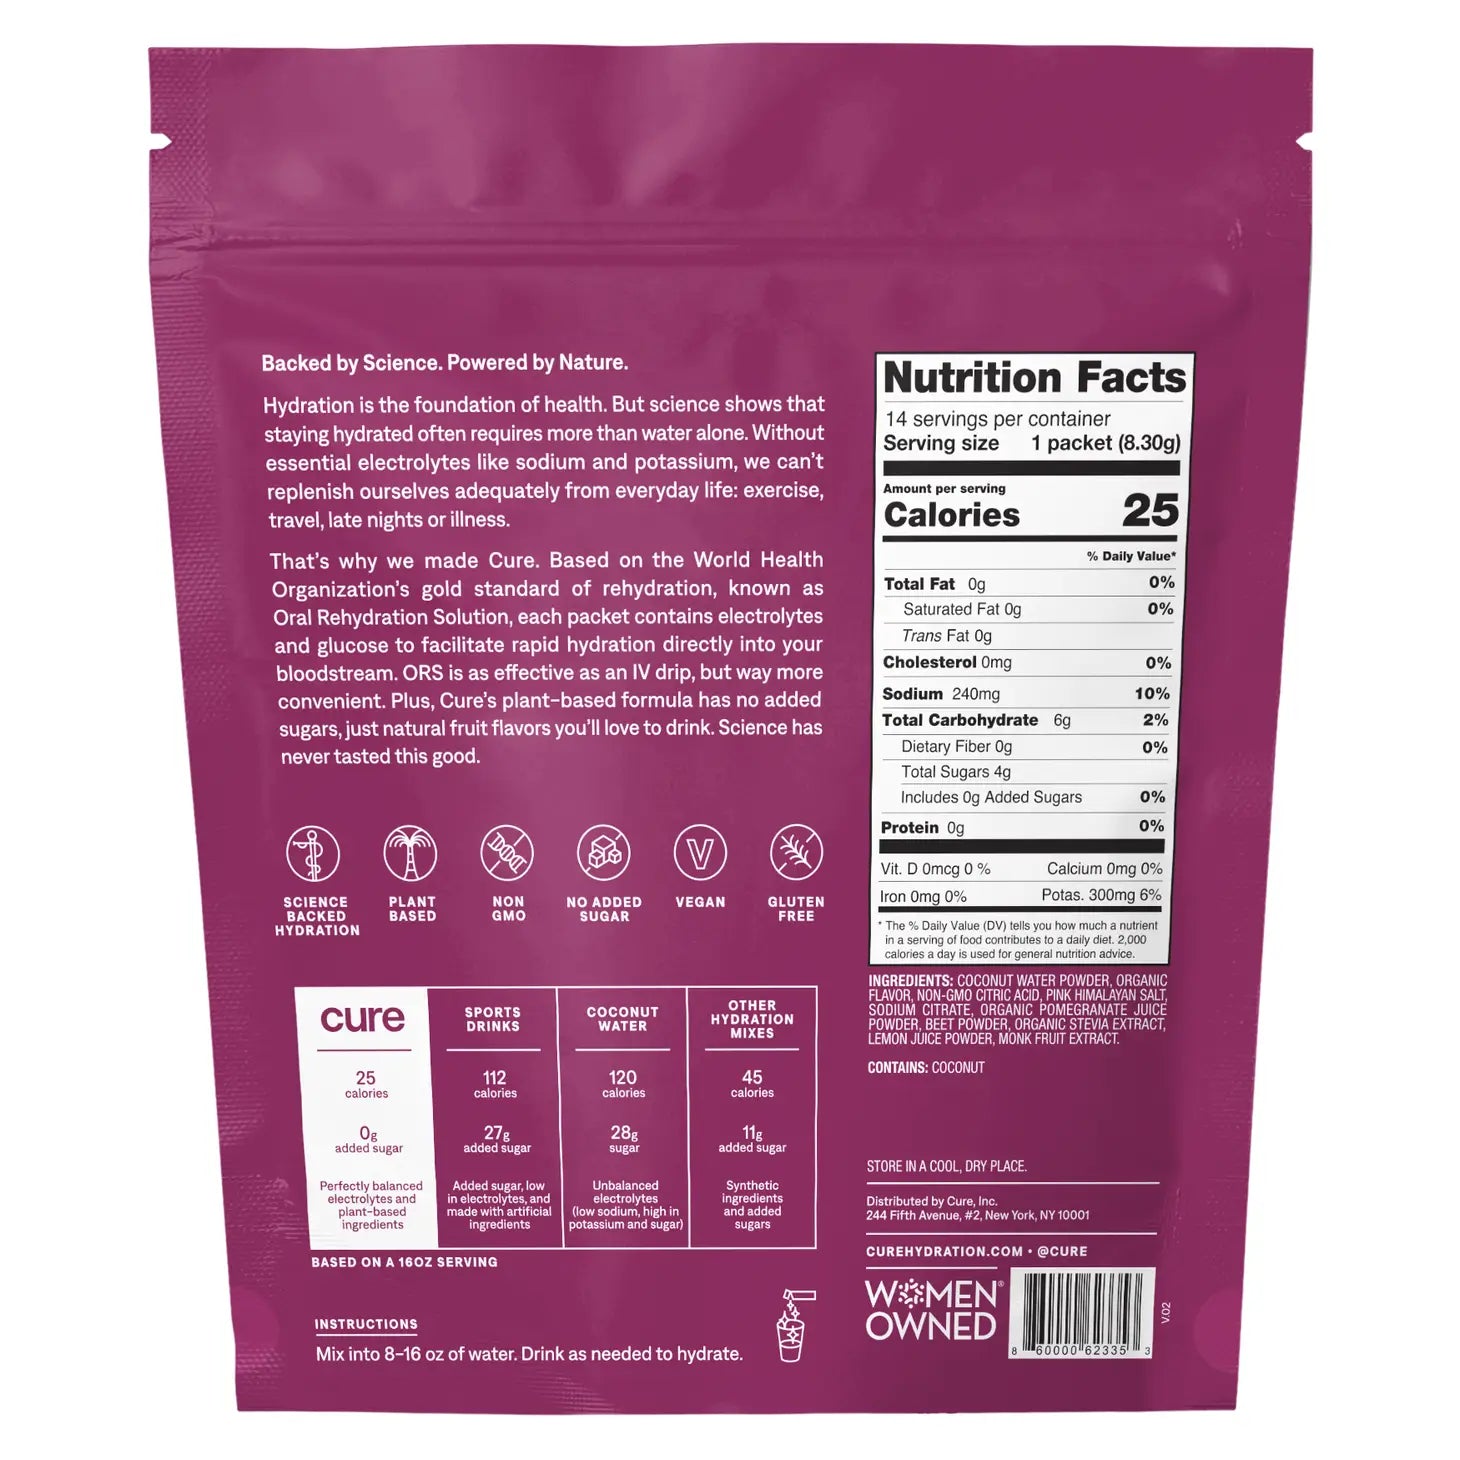 Hydrating Electrolyte Drink Mix Berry Pomengranate